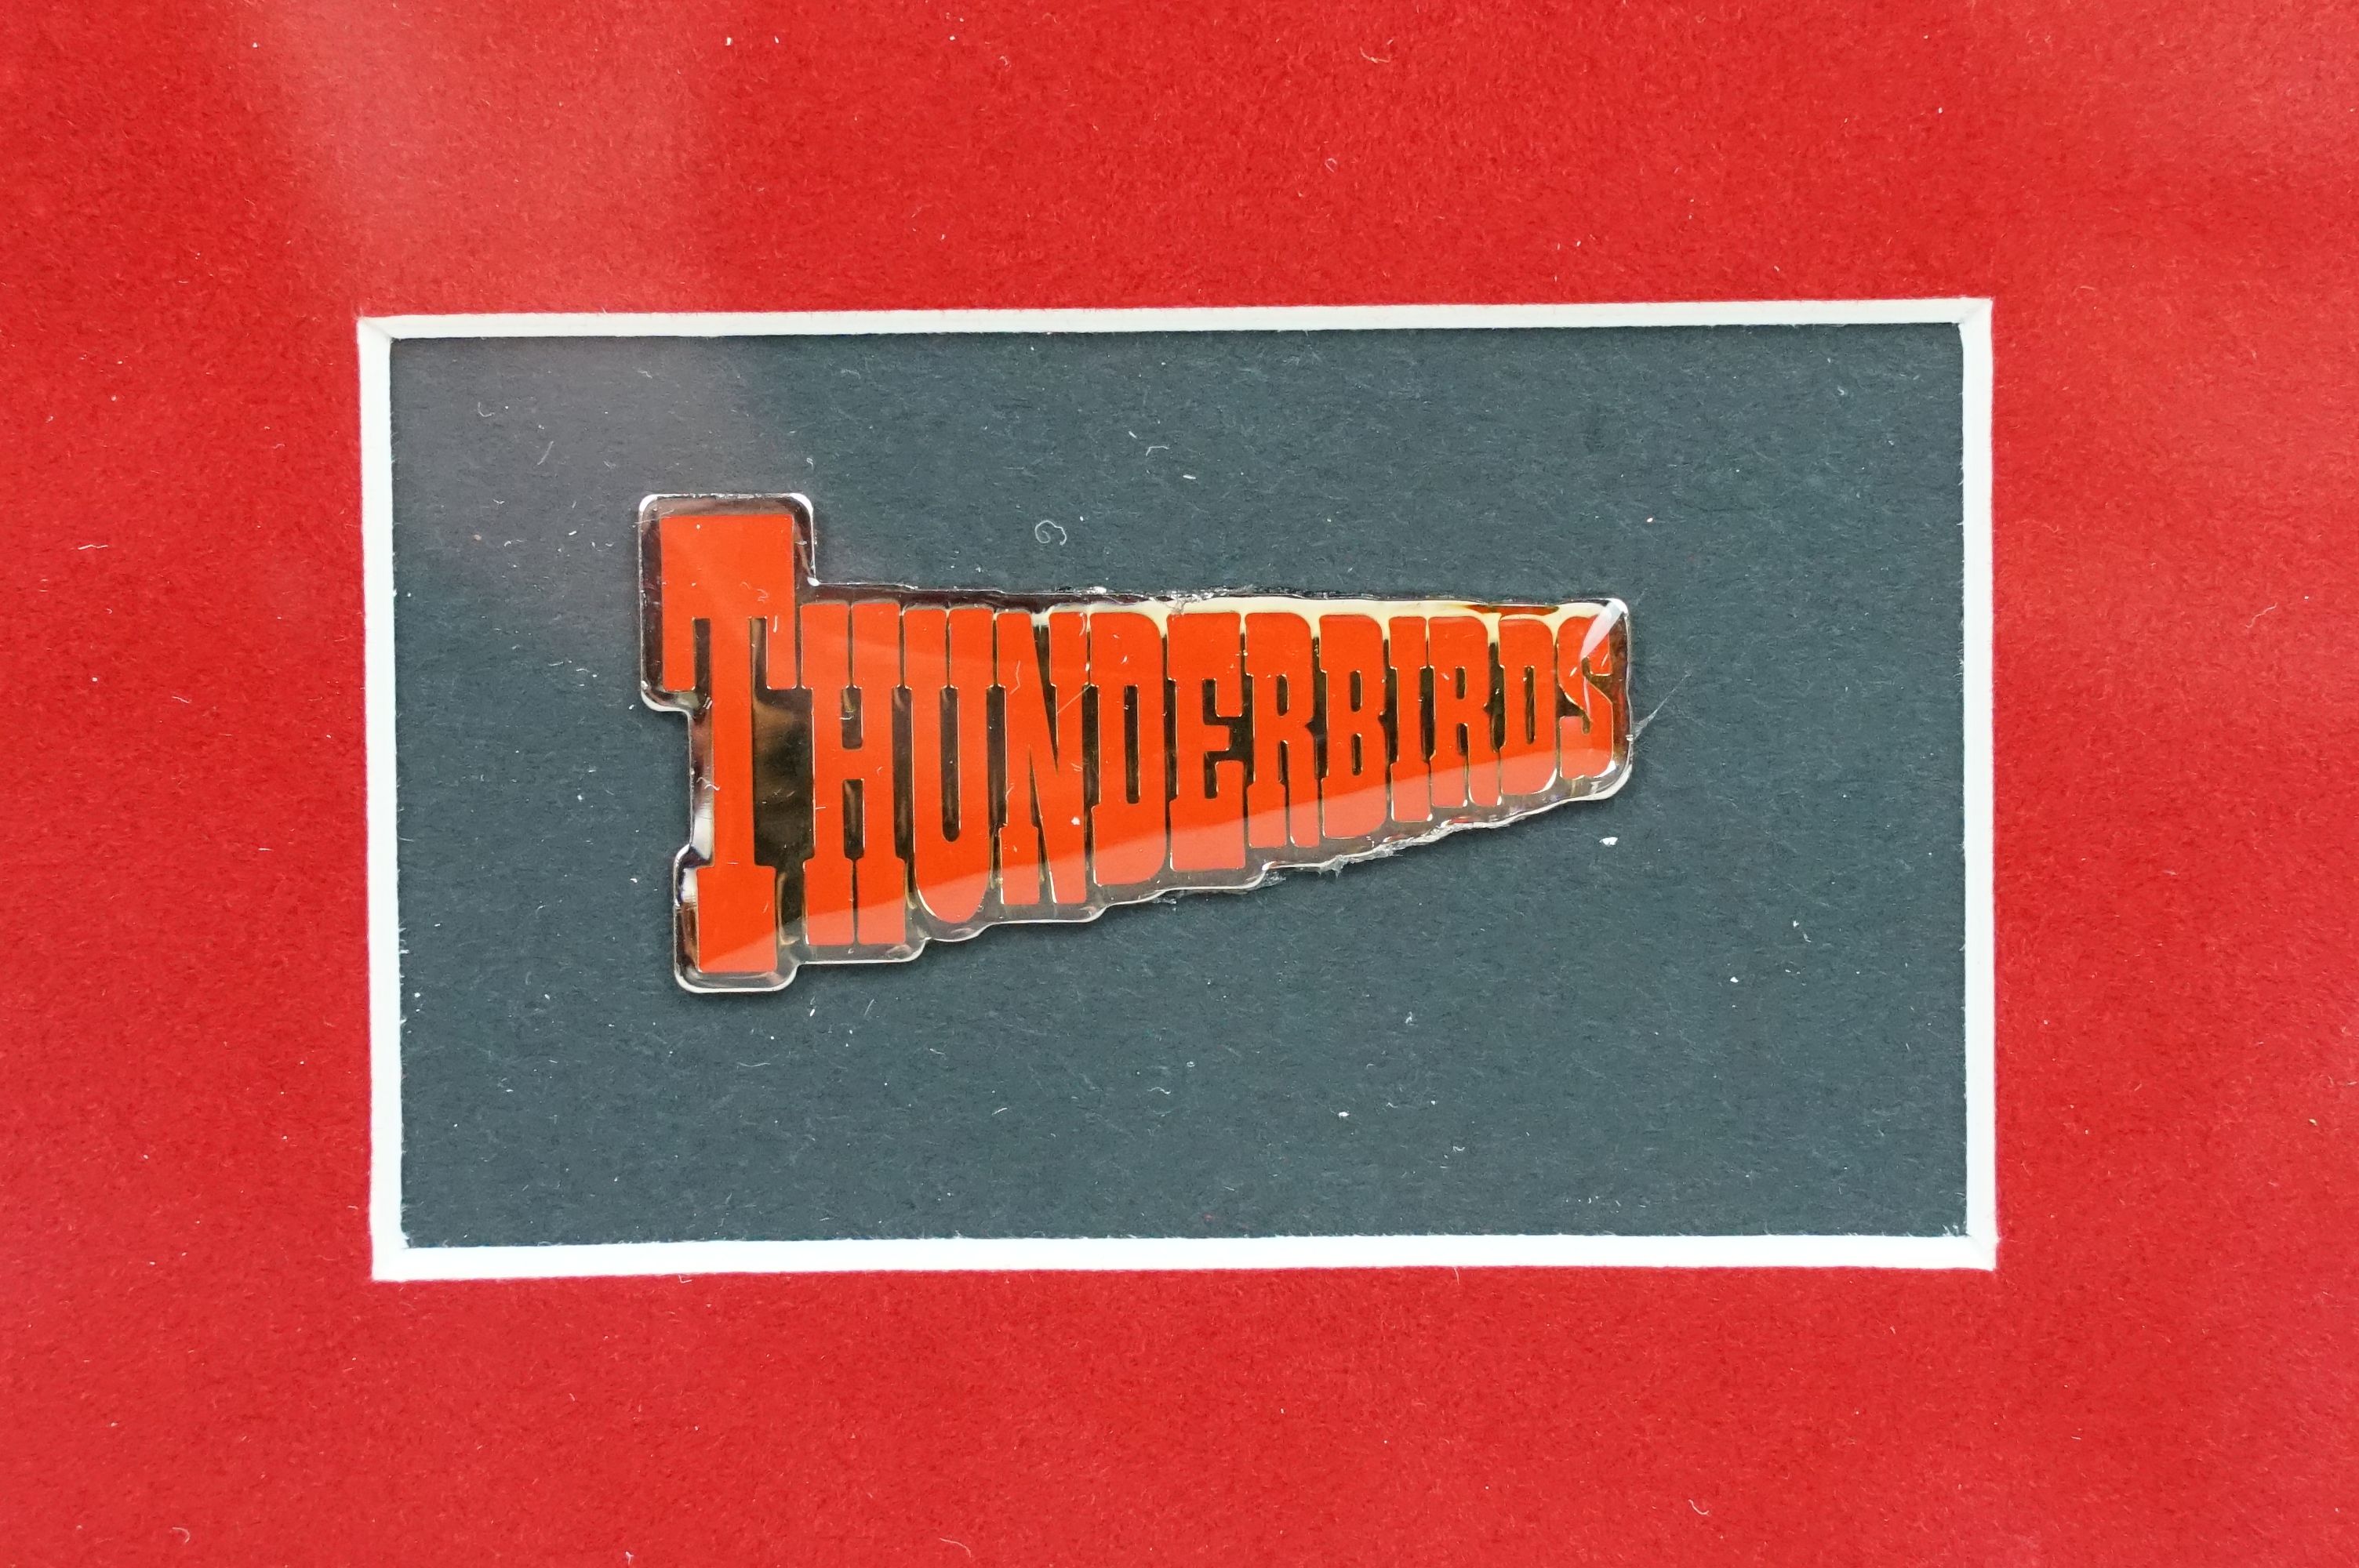 Nine boxed Hamilton cabinet plates from the Thunderbirds ltd edn plate collection by Steve Kyte, - Image 5 of 12